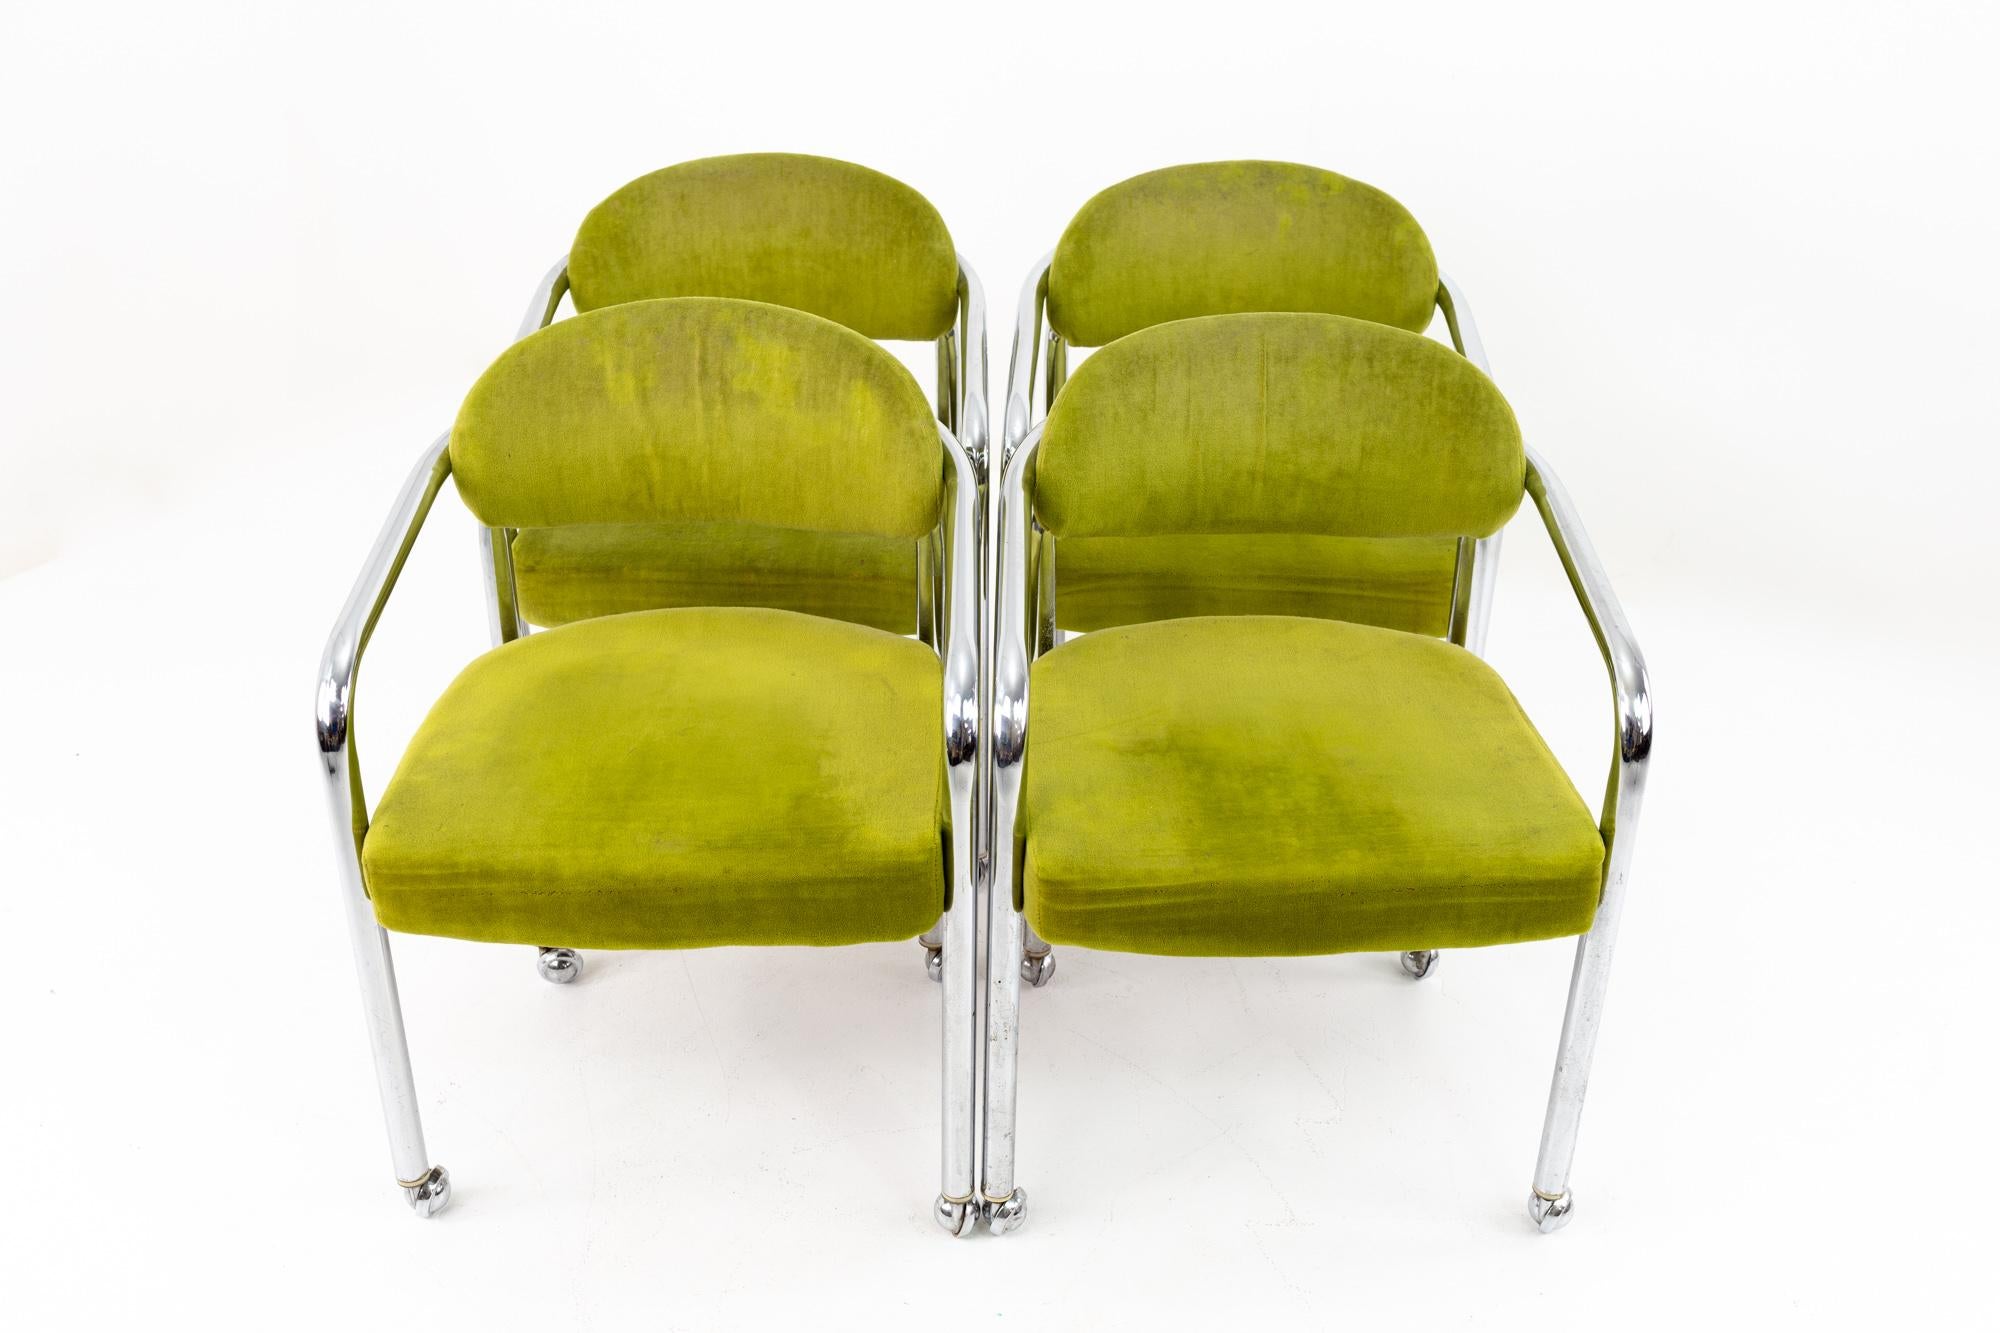 Milo Baughman style chromcraft Mid Century green chrome dining chairs - Set of 4
These chairs are 22 wide and 22 deep by 32 high with an 18 inch seat height

Each piece of furniture is available in what we call restored vintage condition. Upon